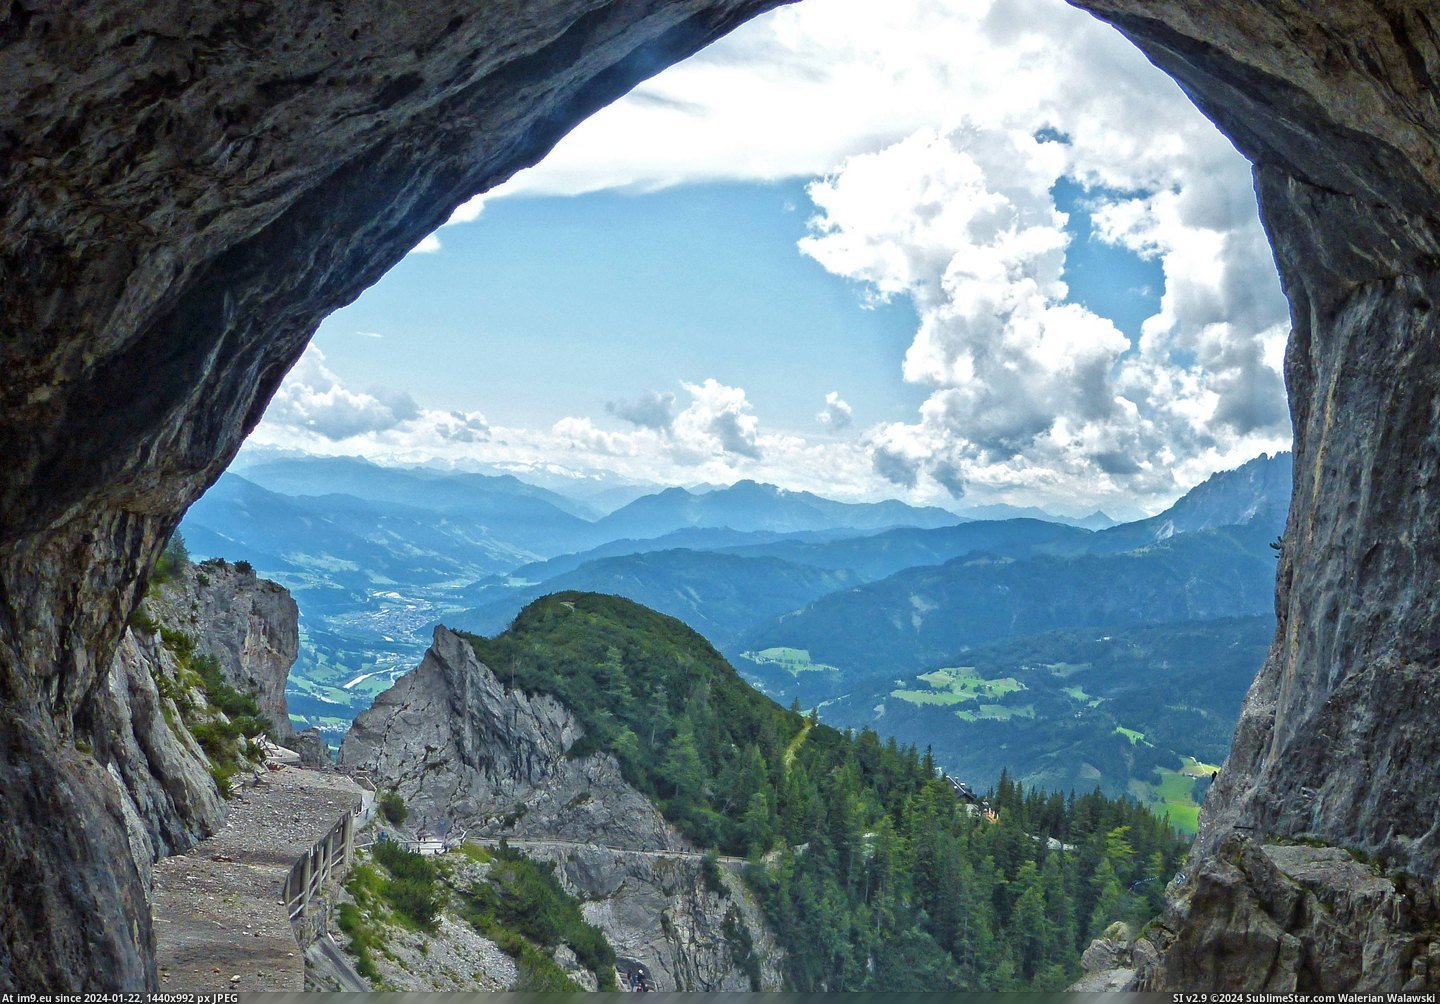 #World #Ice #Austria #Entrance #Werfen #Largest #Cave [Earthporn] View from the entrance of the largest ice cave in the world - Werfen, Austria [OC][3496x2421] Pic. (Изображение из альбом My r/EARTHPORN favs))